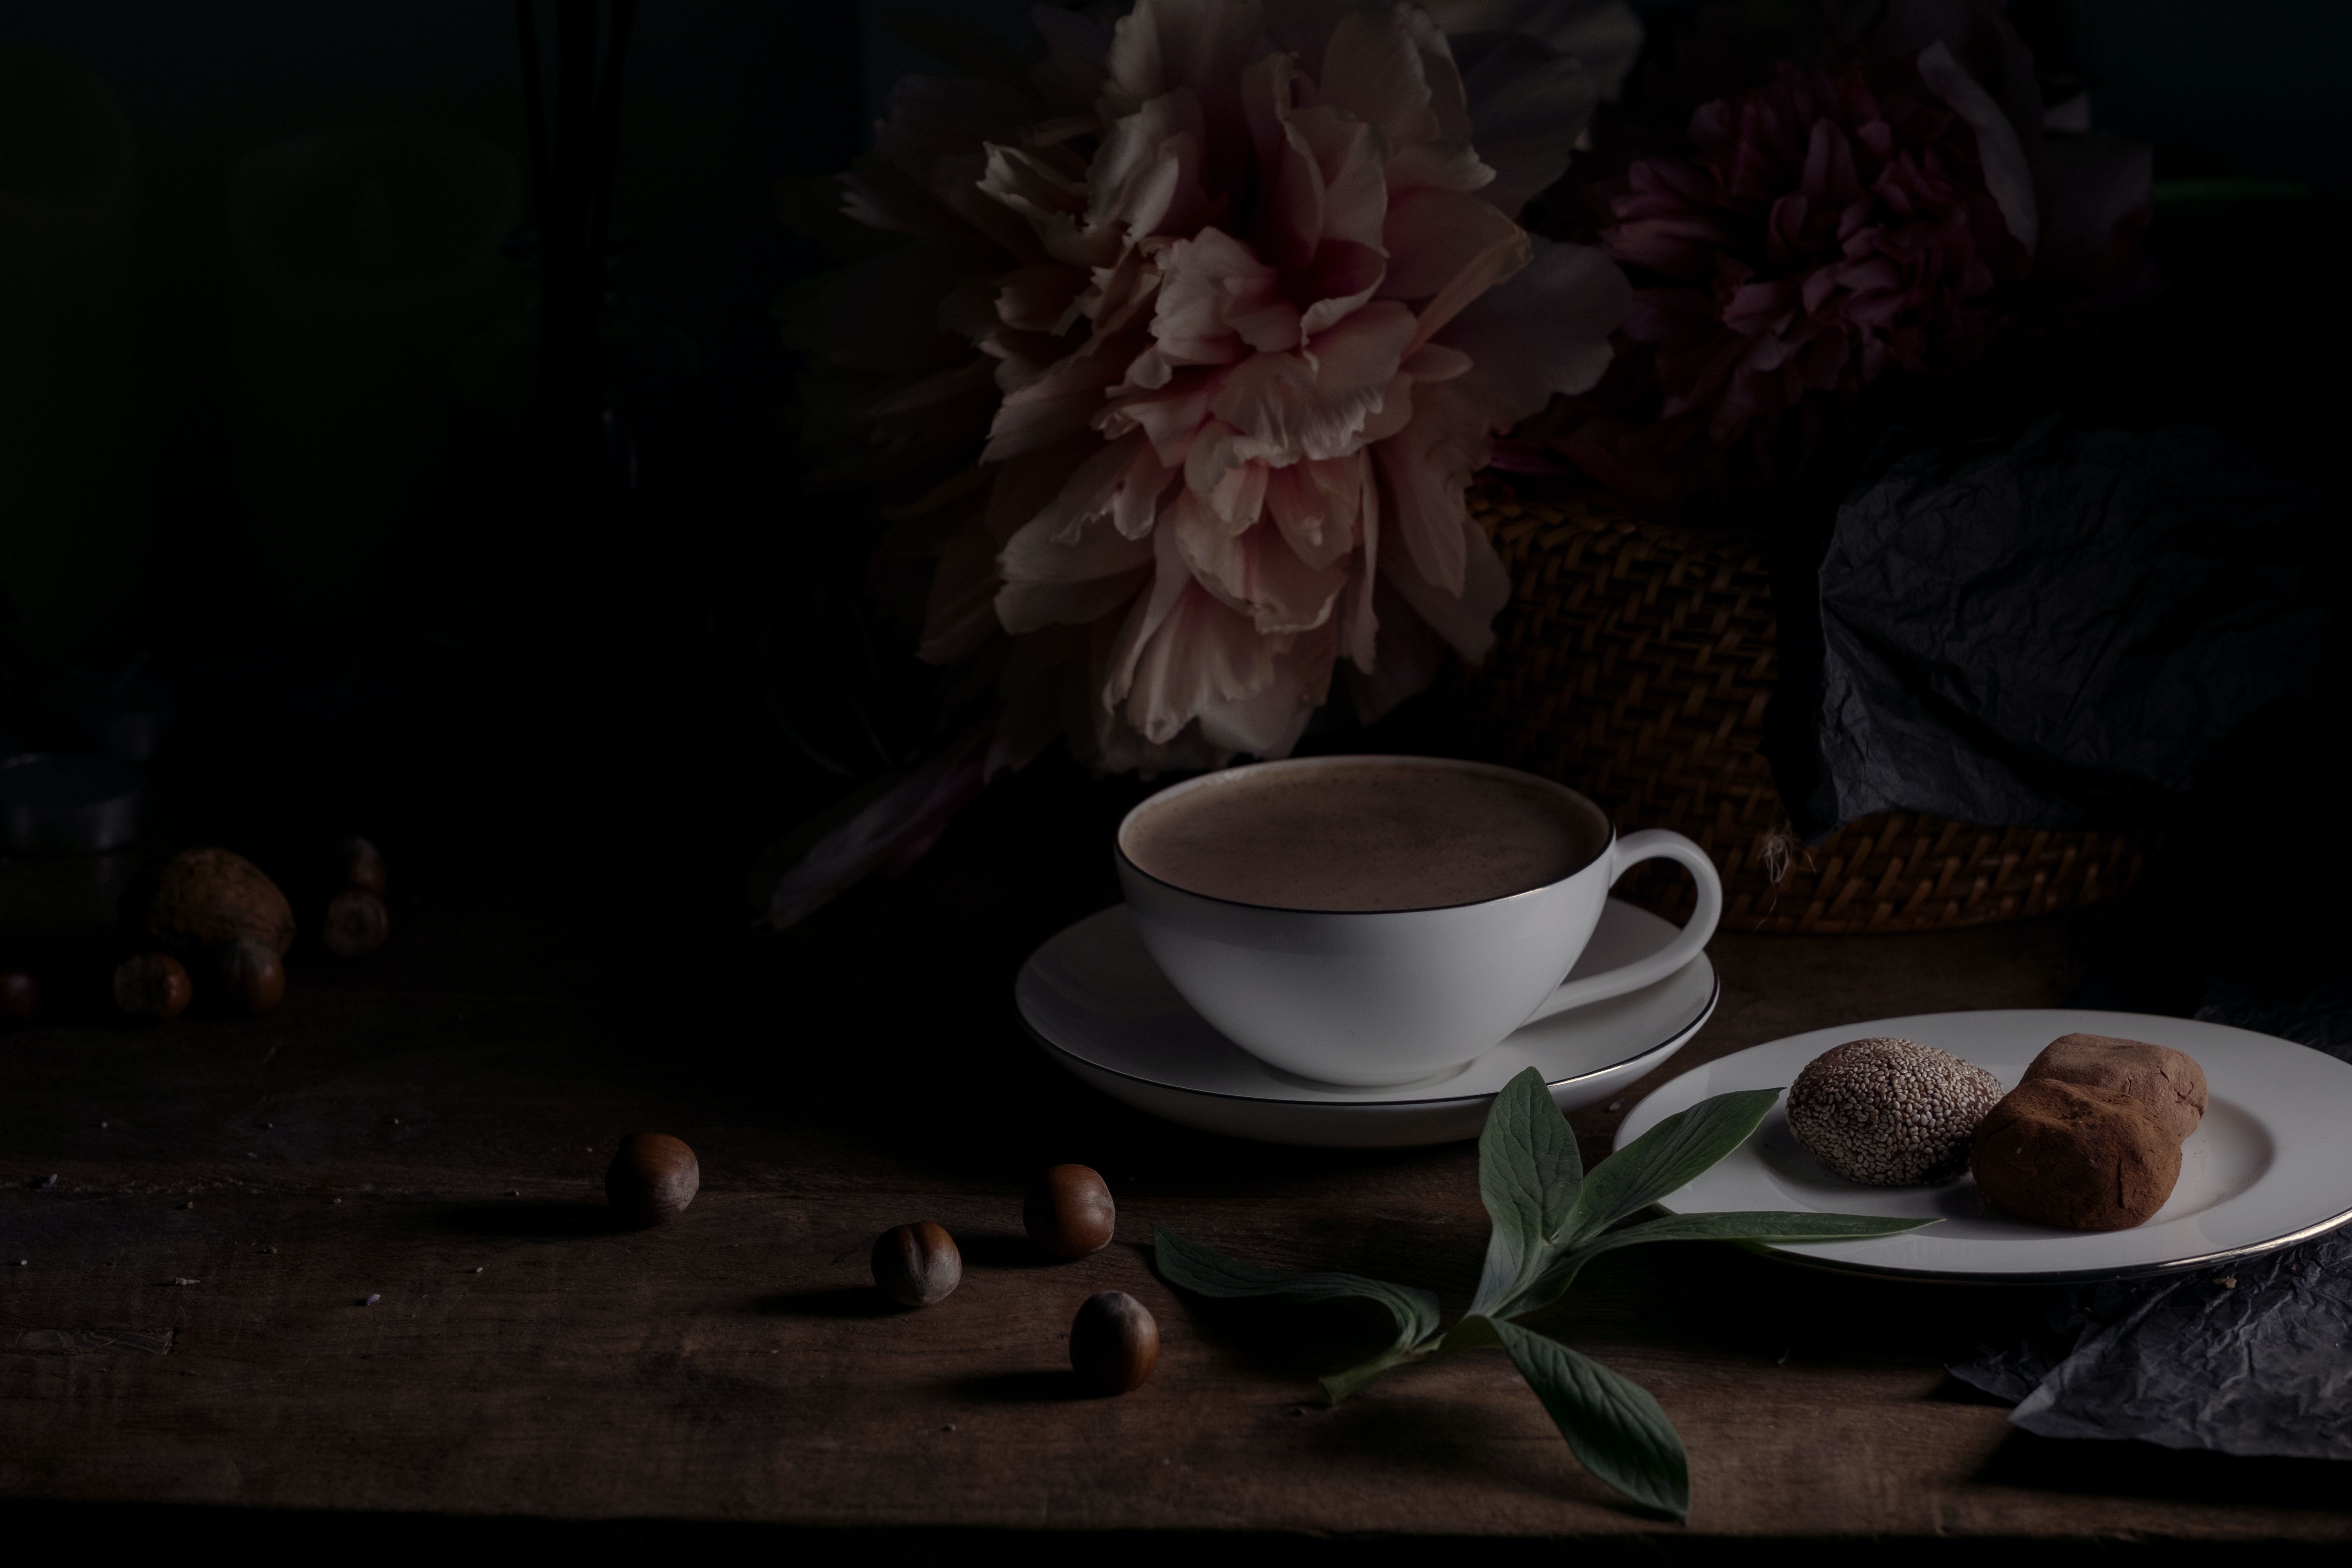 coffee, still life, miscellanea, miscellaneous, cup, drink, beverage, pion, peony